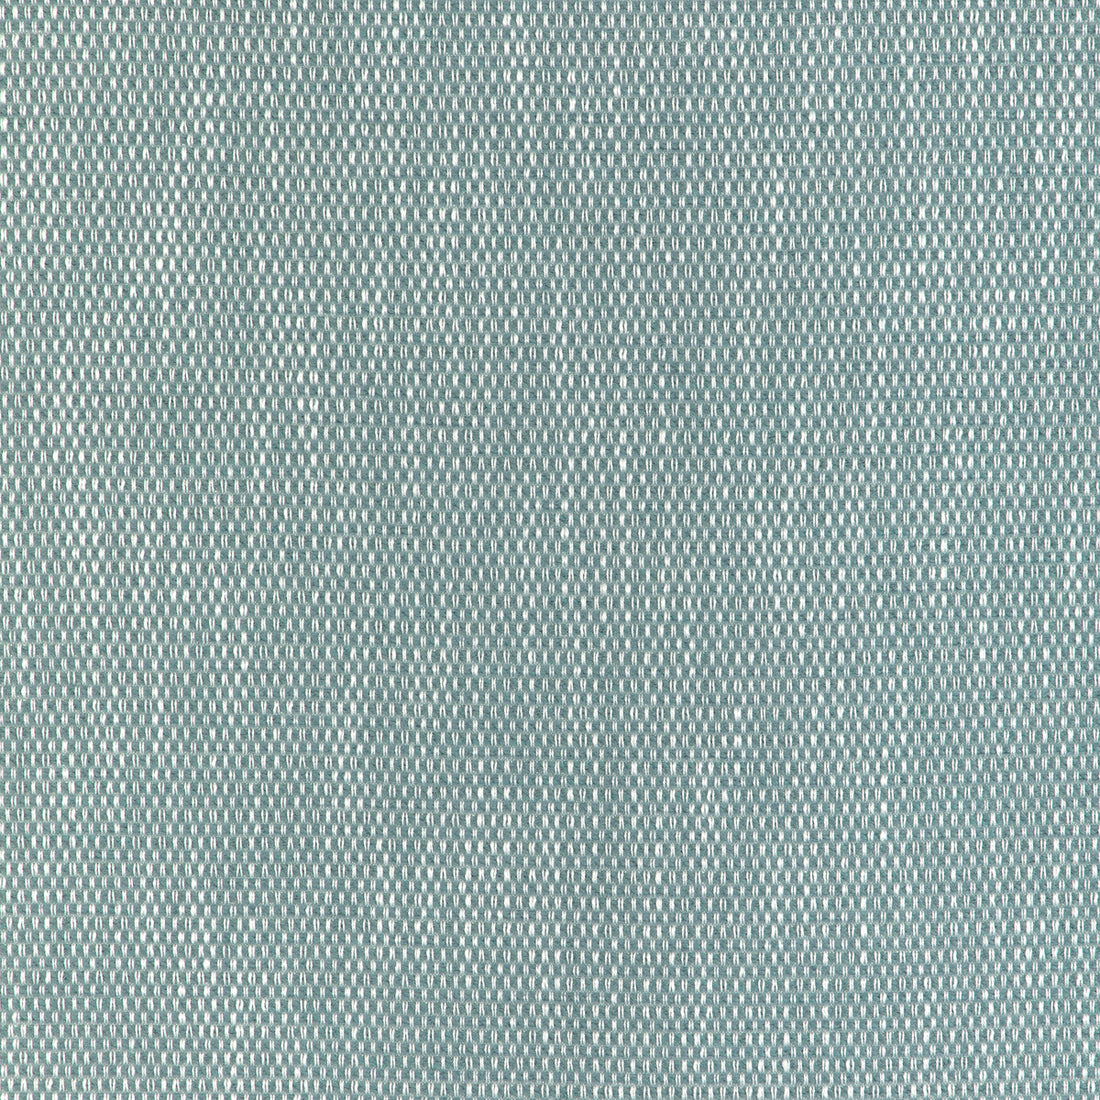 Narrows fabric in lagoon color - pattern 37049.5.0 - by Kravet Design in the Thom Filicia Latitude collection